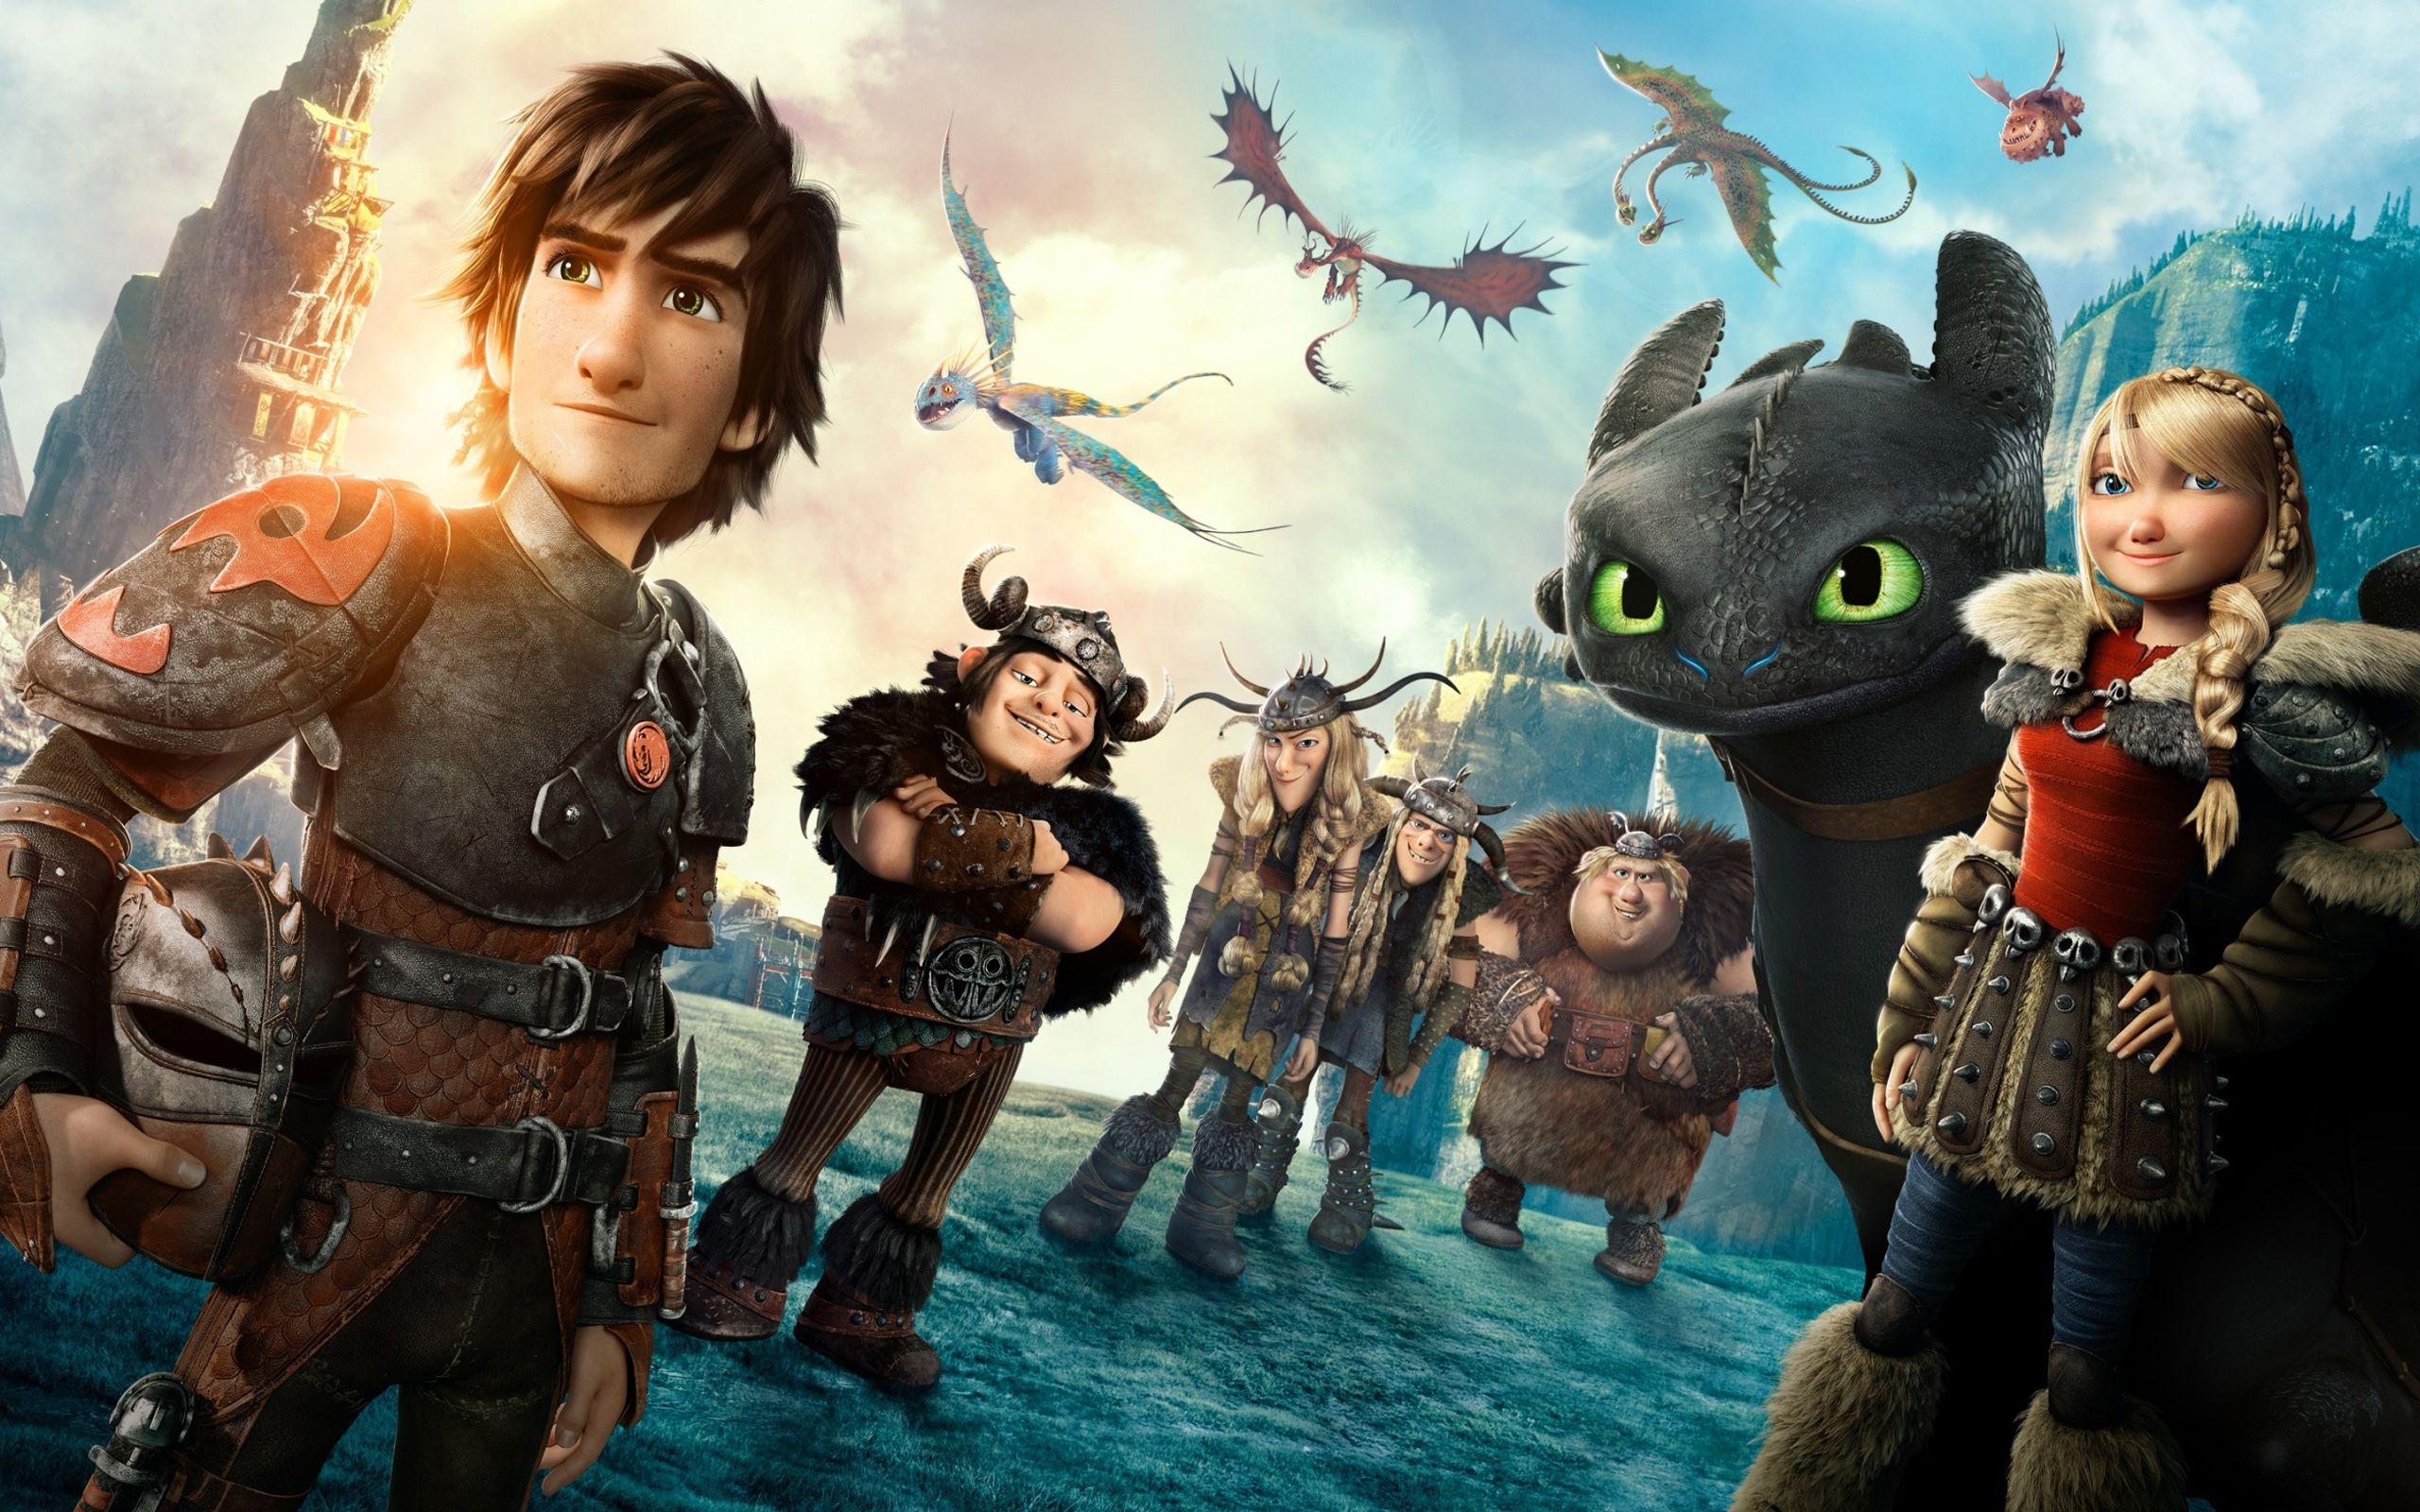 Movies How to Train Your Dragon 2 wallpaper Desktop, Phone, Tablet